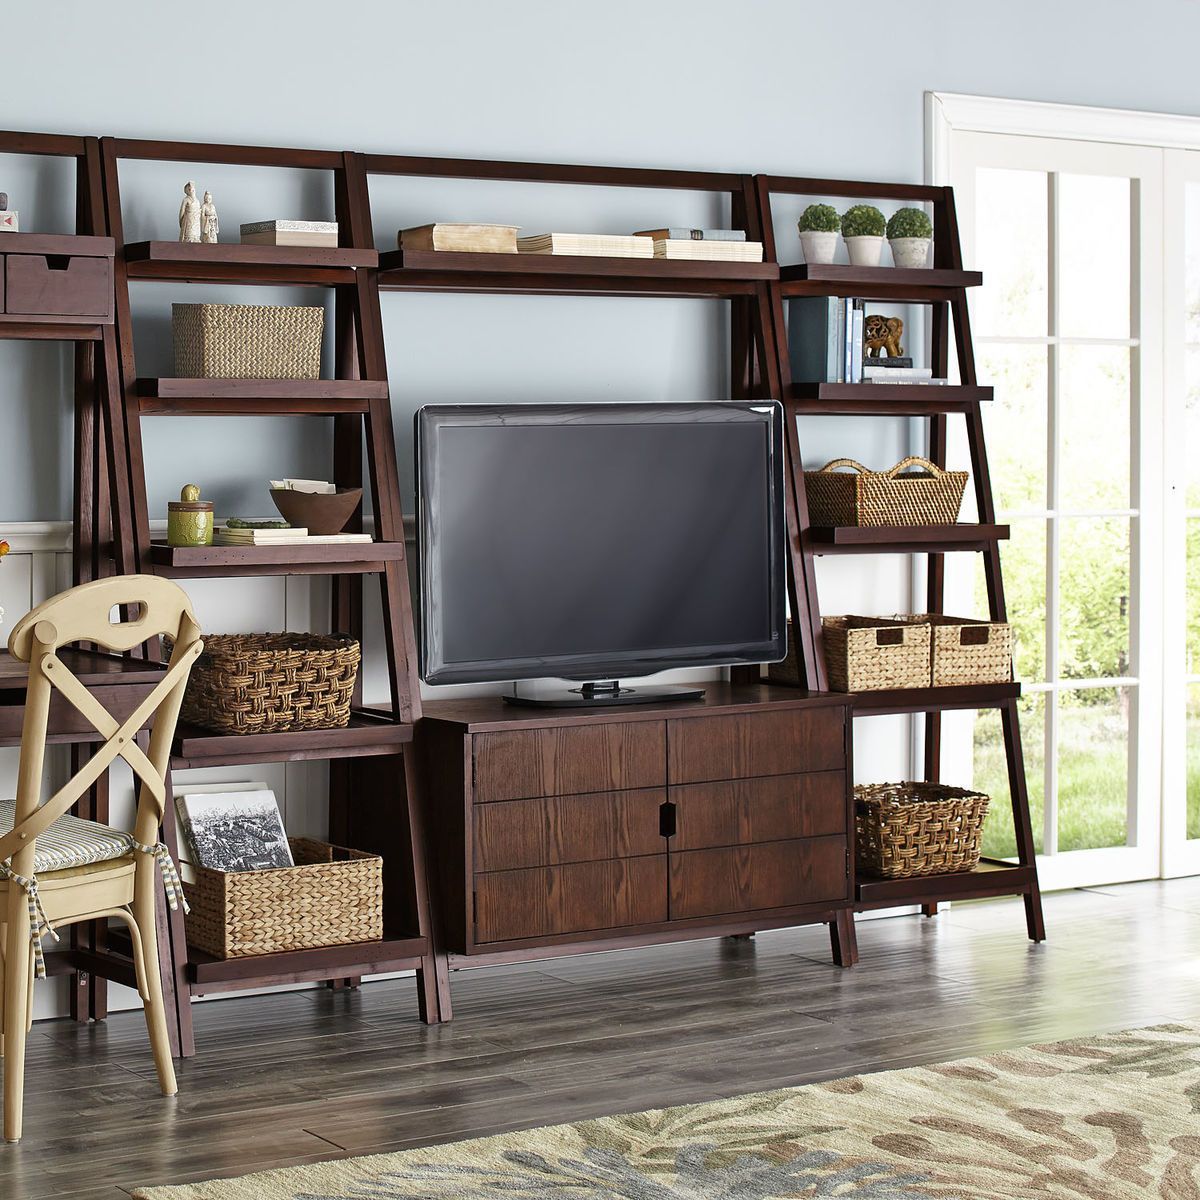 Morgan Tall Tv Stand – Tuscan Brown | Pier 1 Imports In Tv Stand Tall Narrow (View 14 of 15)